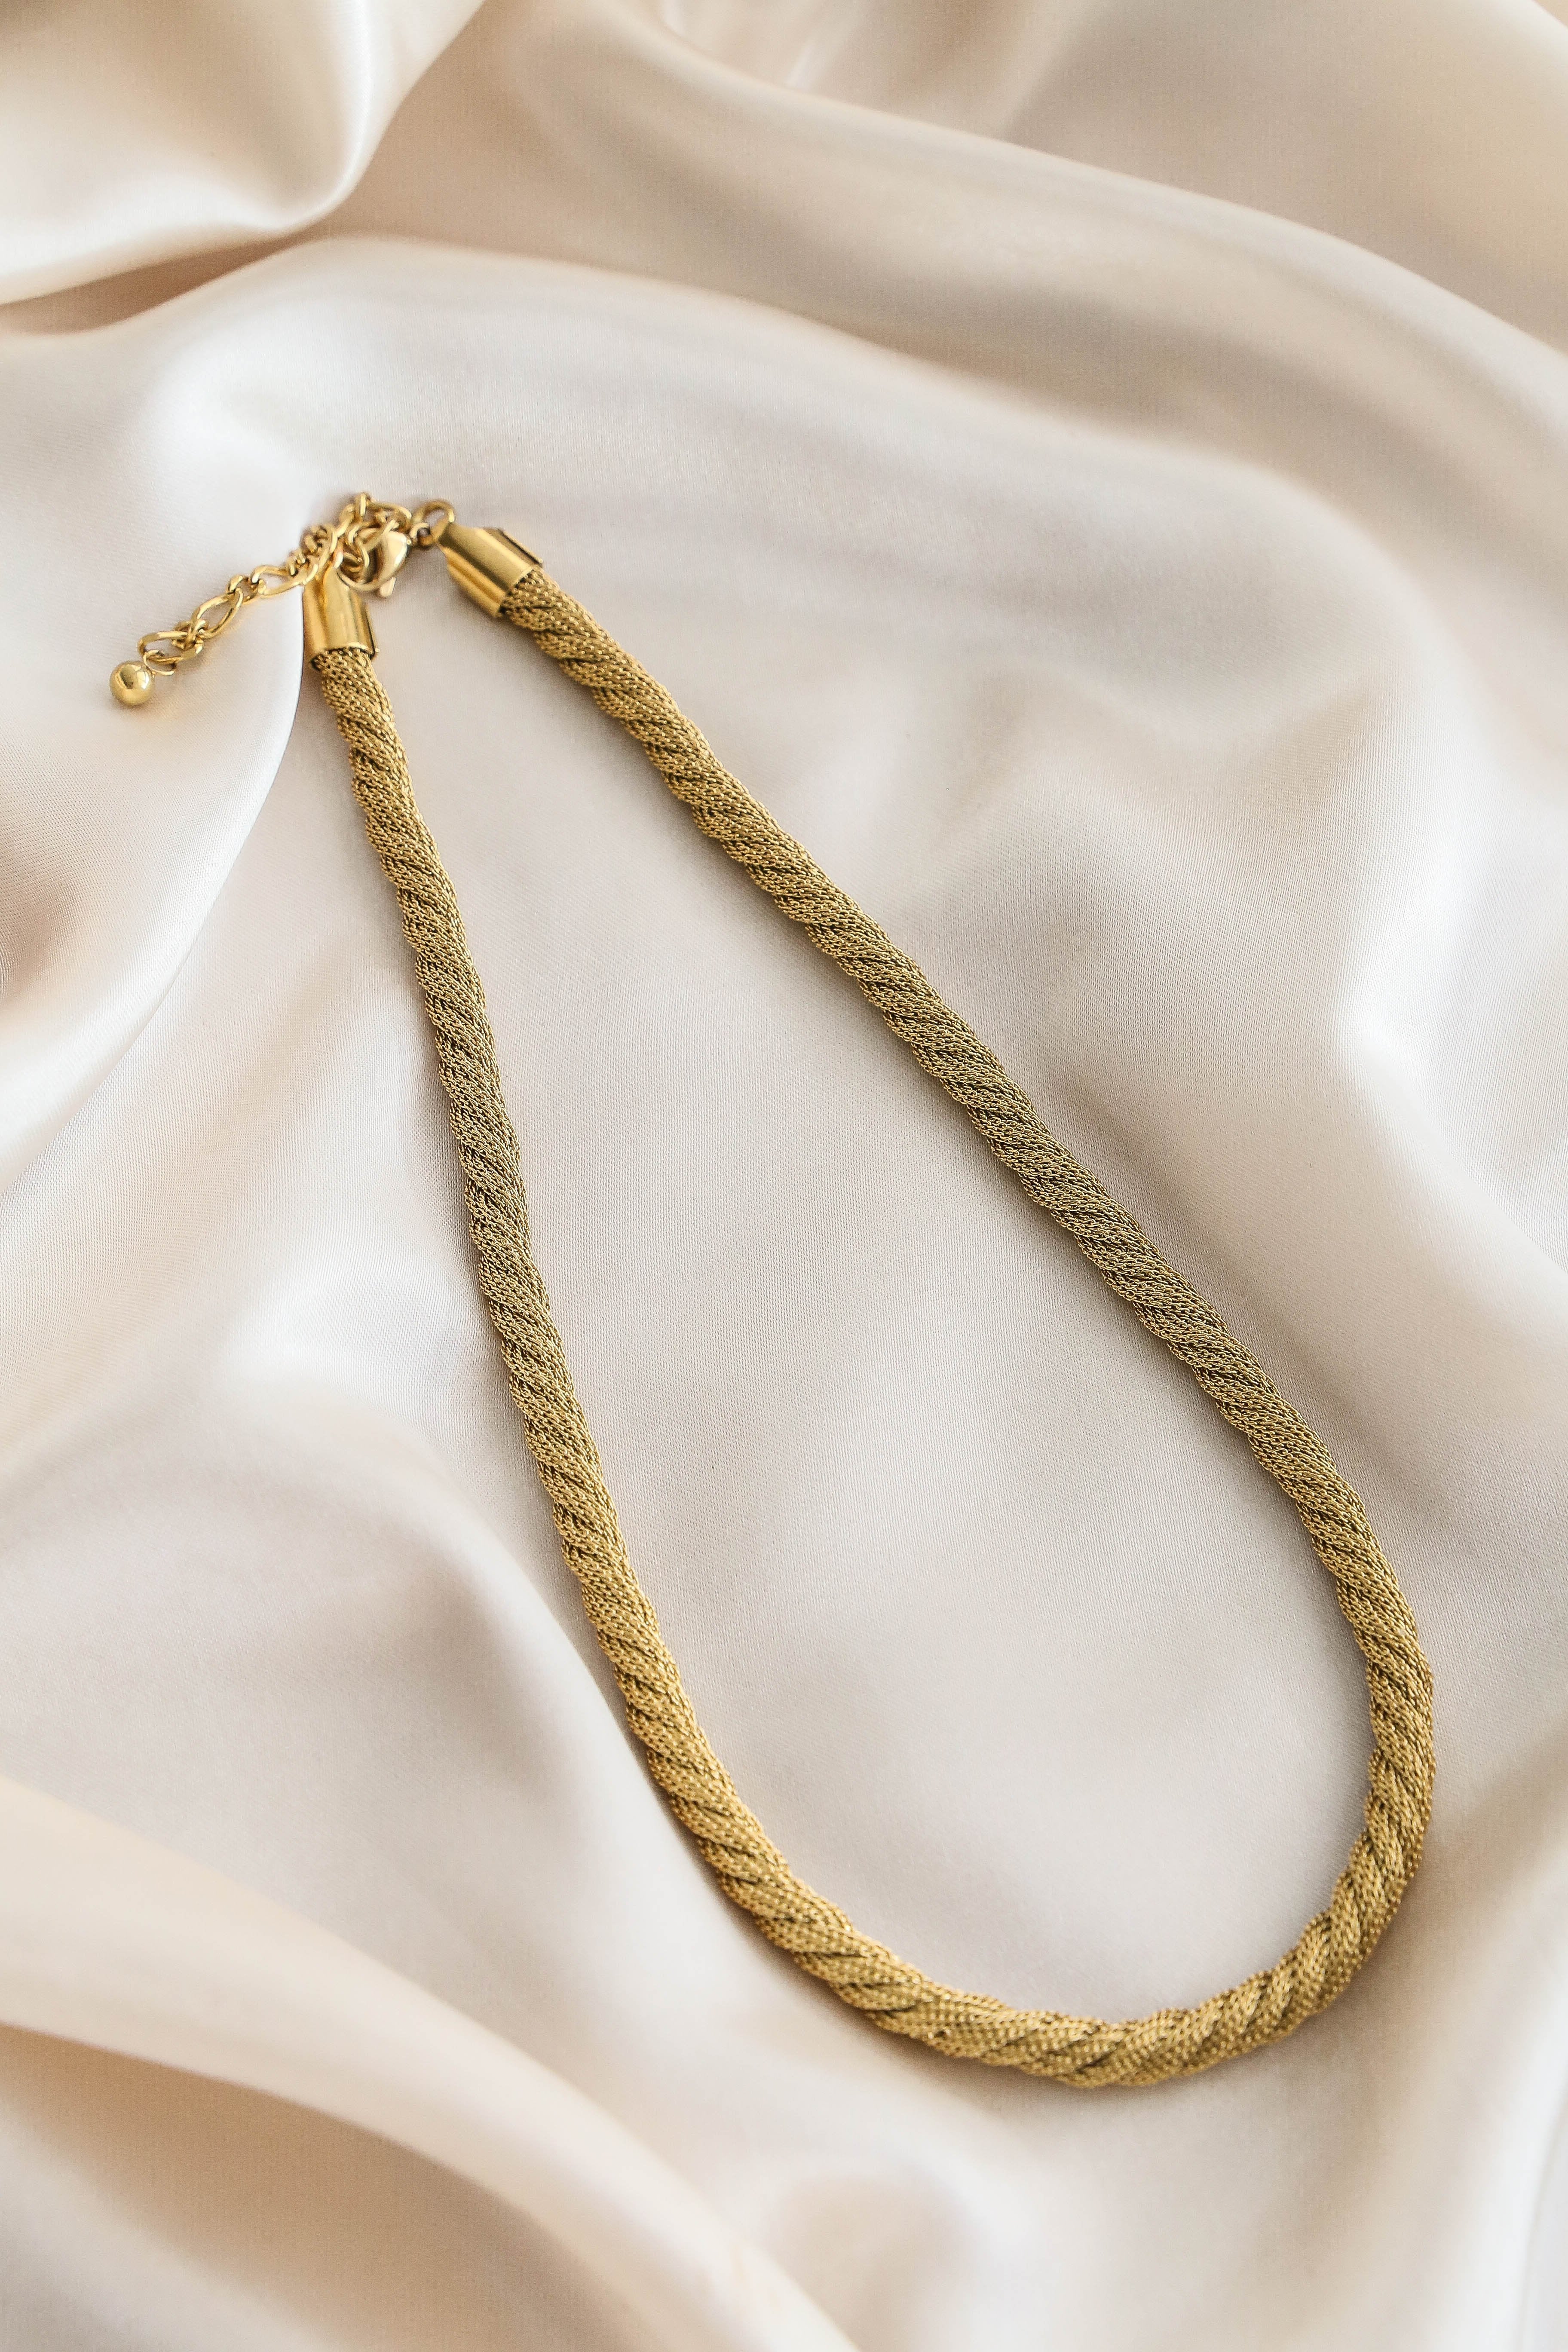 Marina Necklace - Boutique Minimaliste has waterproof, durable, elegant and vintage inspired jewelry